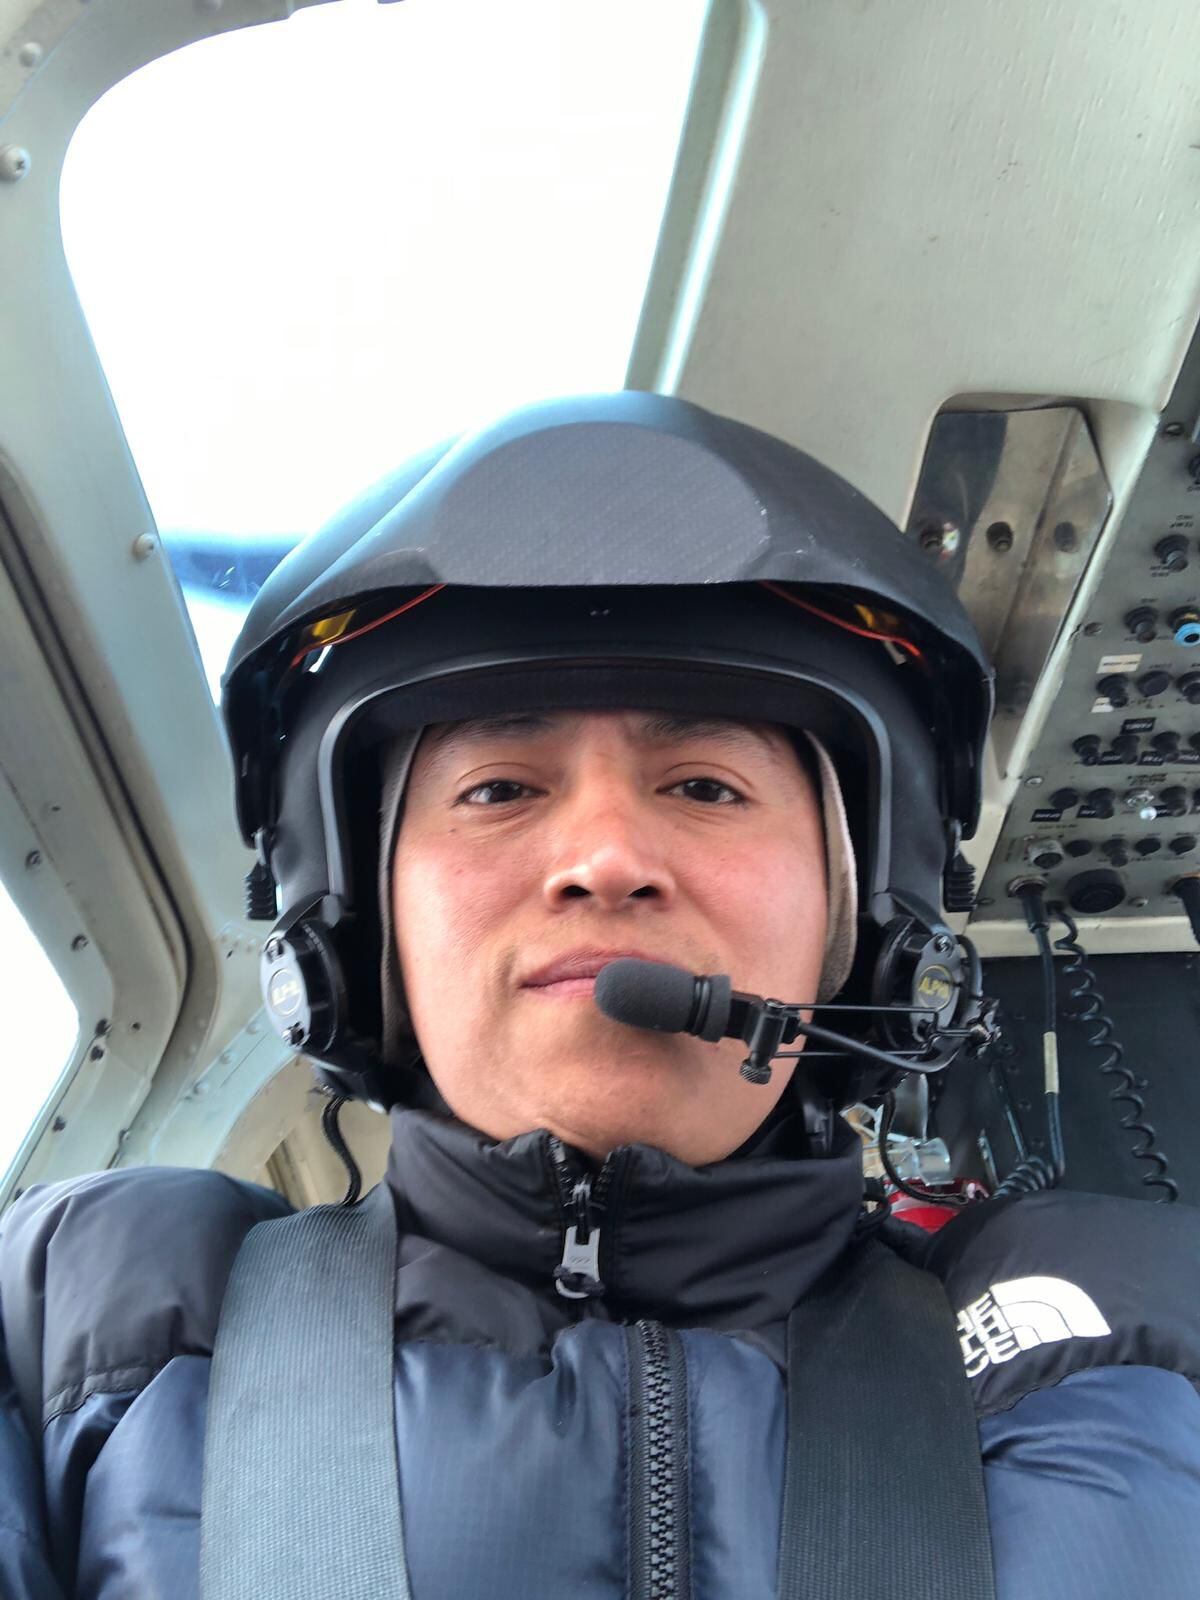 Yazel Hipolito, a 40-year-old from Lima, is a commercial helicopter pilot.  (Photo: Yazel Hipolito / Courtesy of El Comercio)